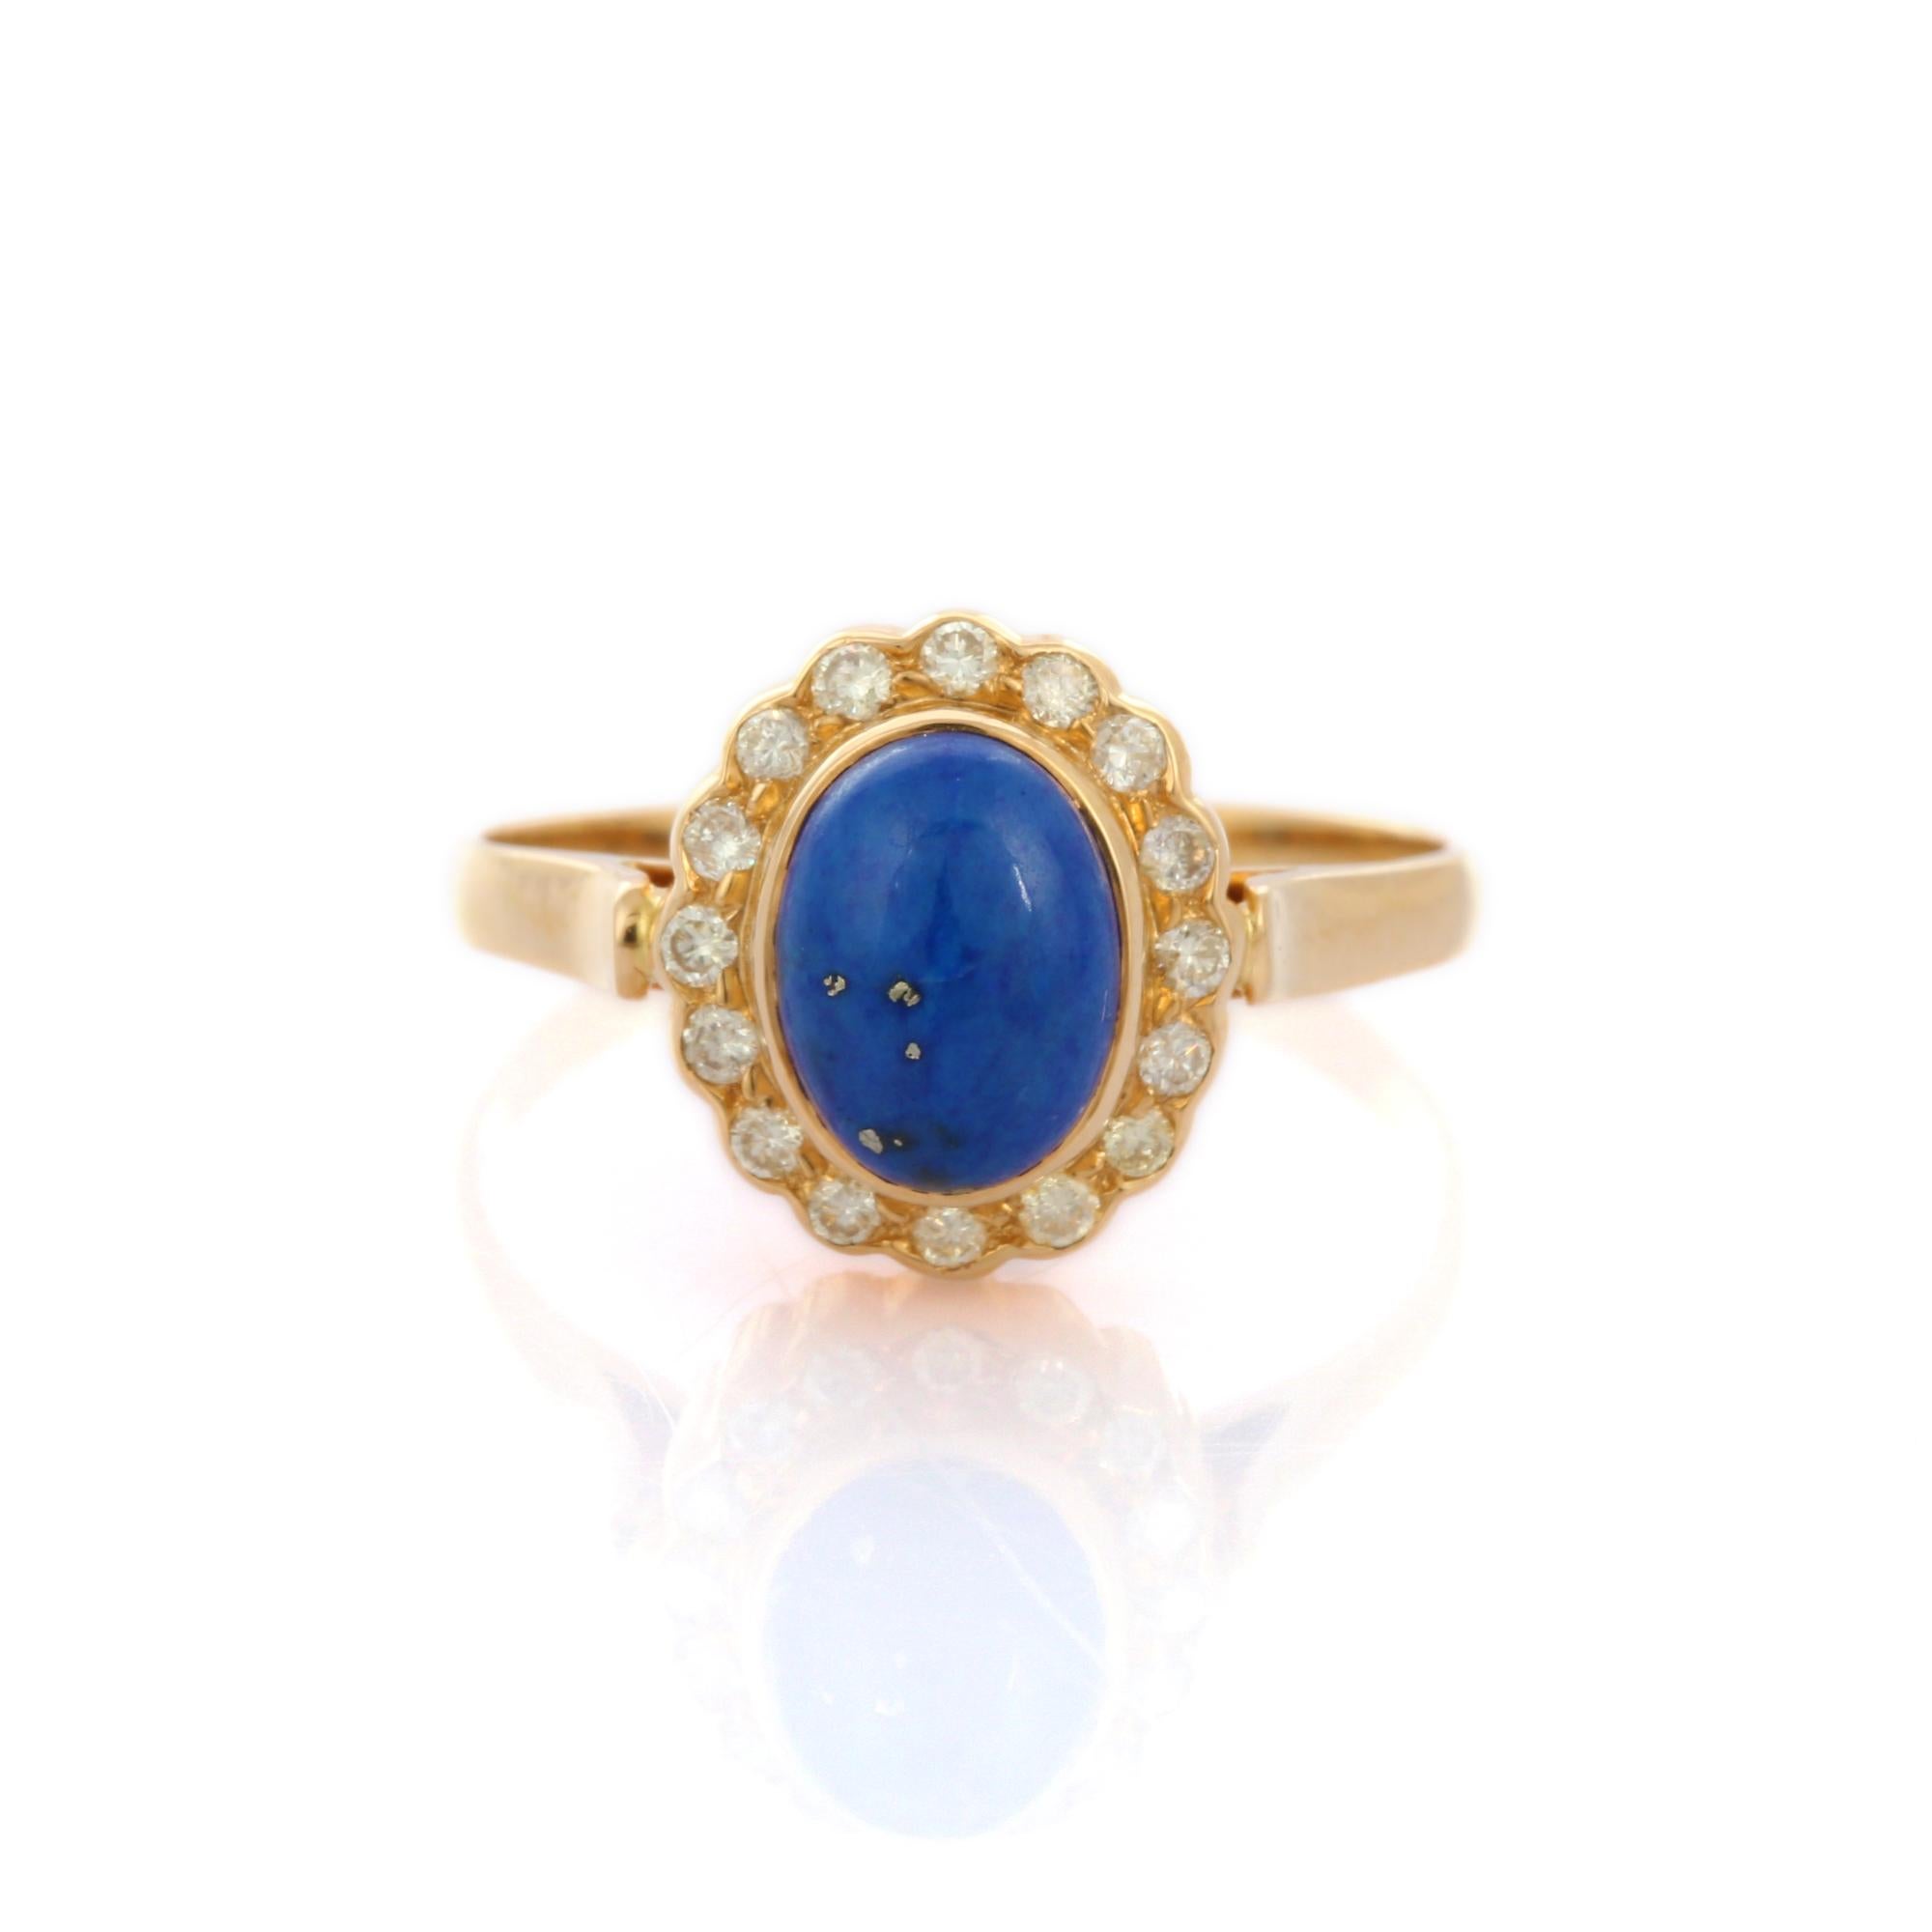 For Sale:  18K Yellow Gold 1.15 Carat Lapis Lazuli with Halo Diamond Cocktail Ring 9